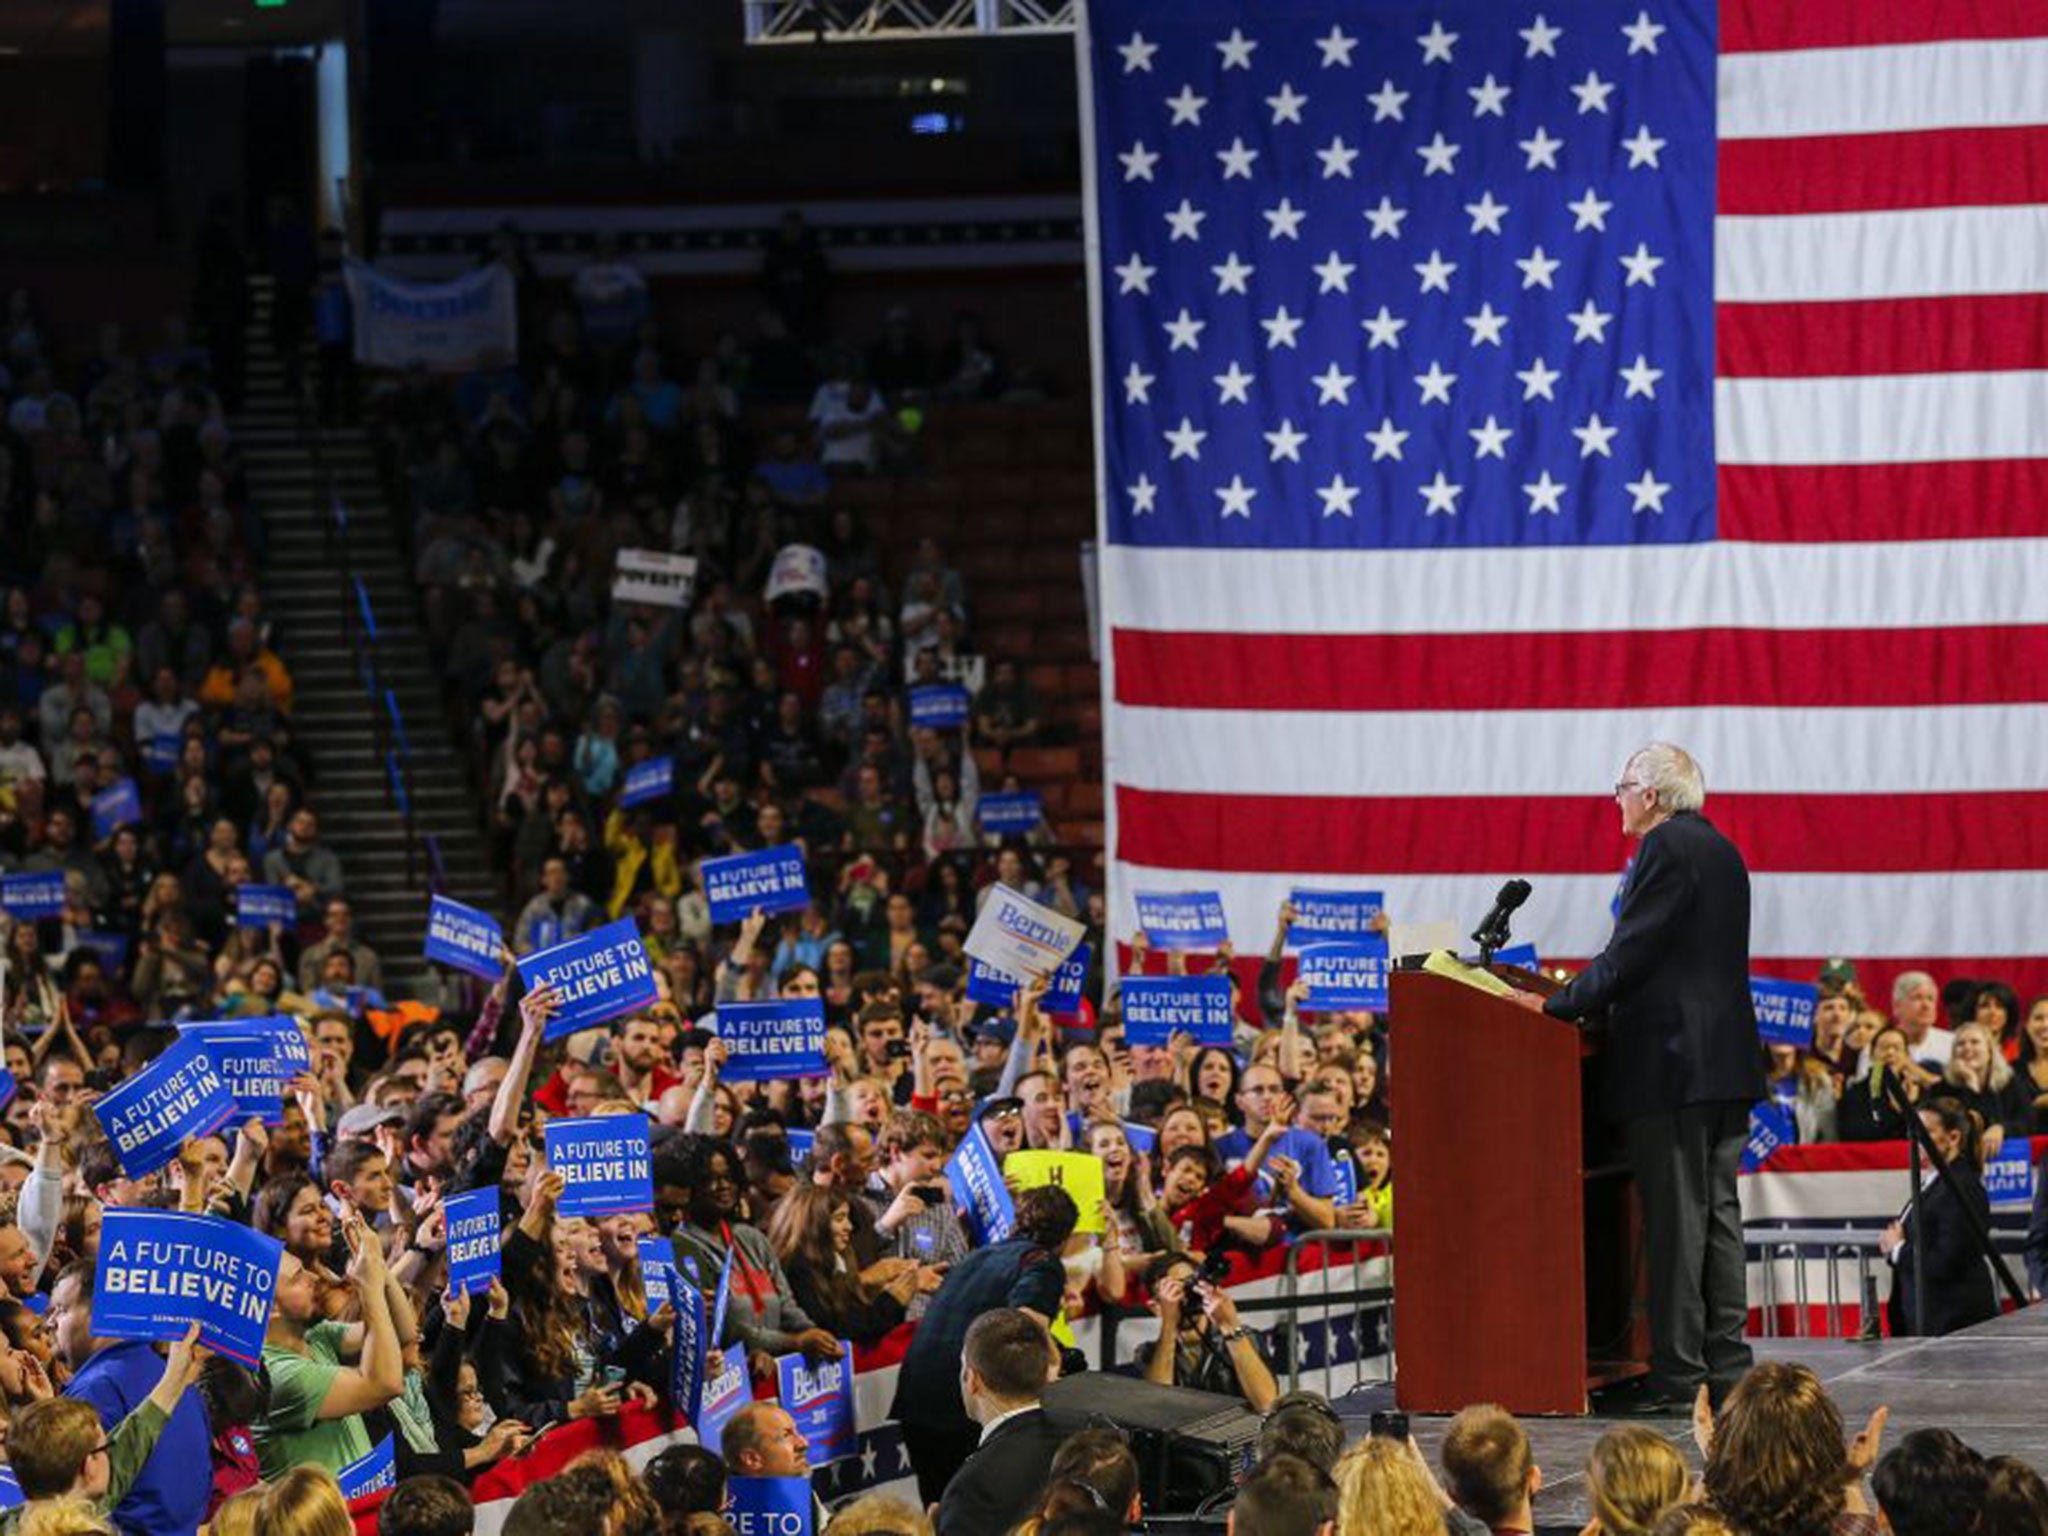 Bernie Sanders will work hard in South Carolina to win as many votes as he can